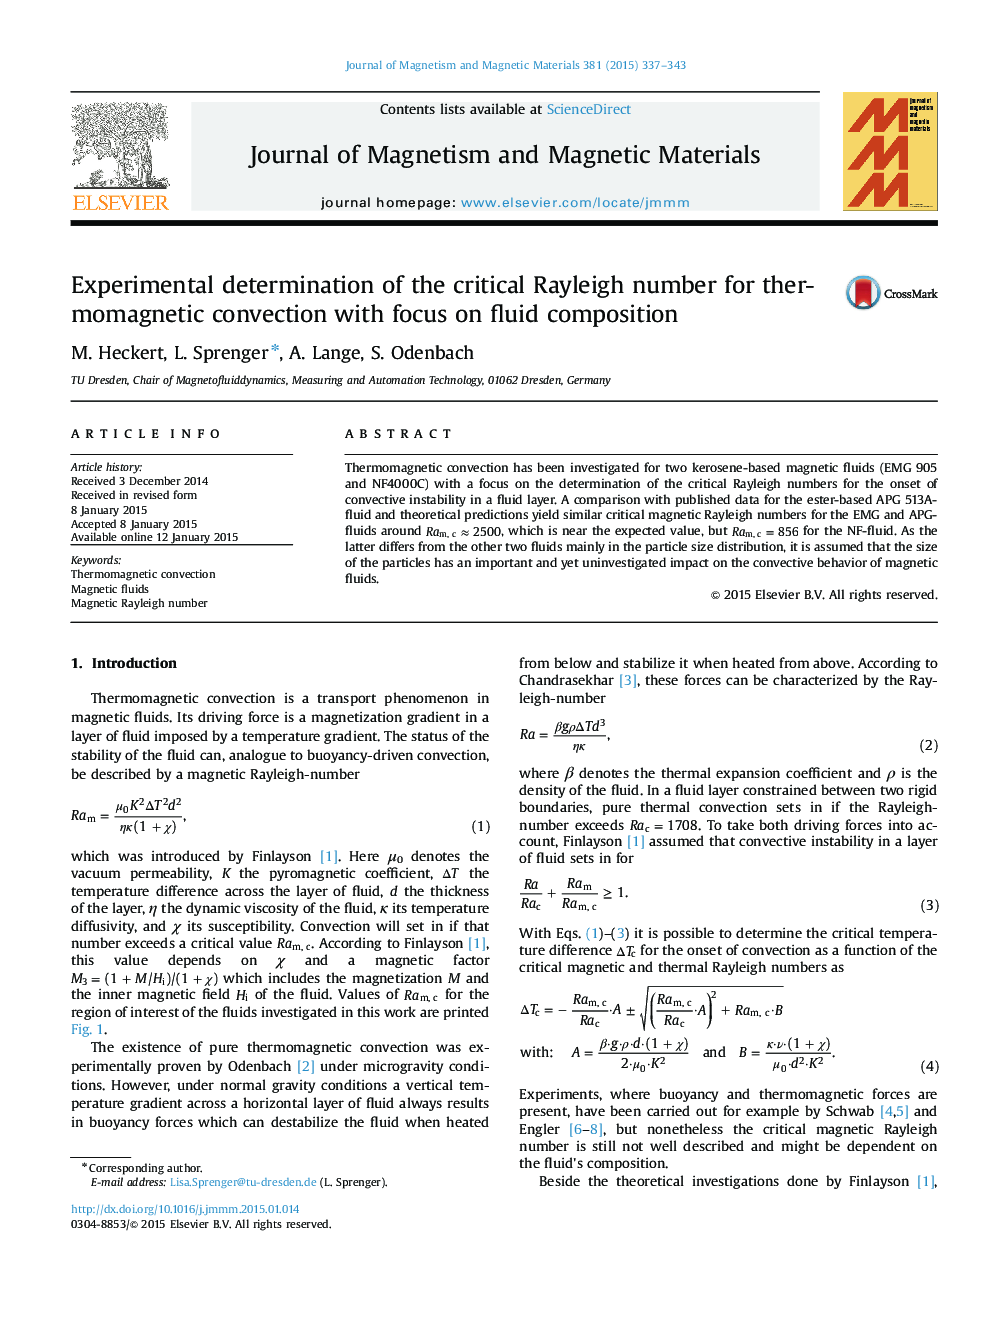 Experimental determination of the critical Rayleigh number for thermomagnetic convection with focus on fluid composition